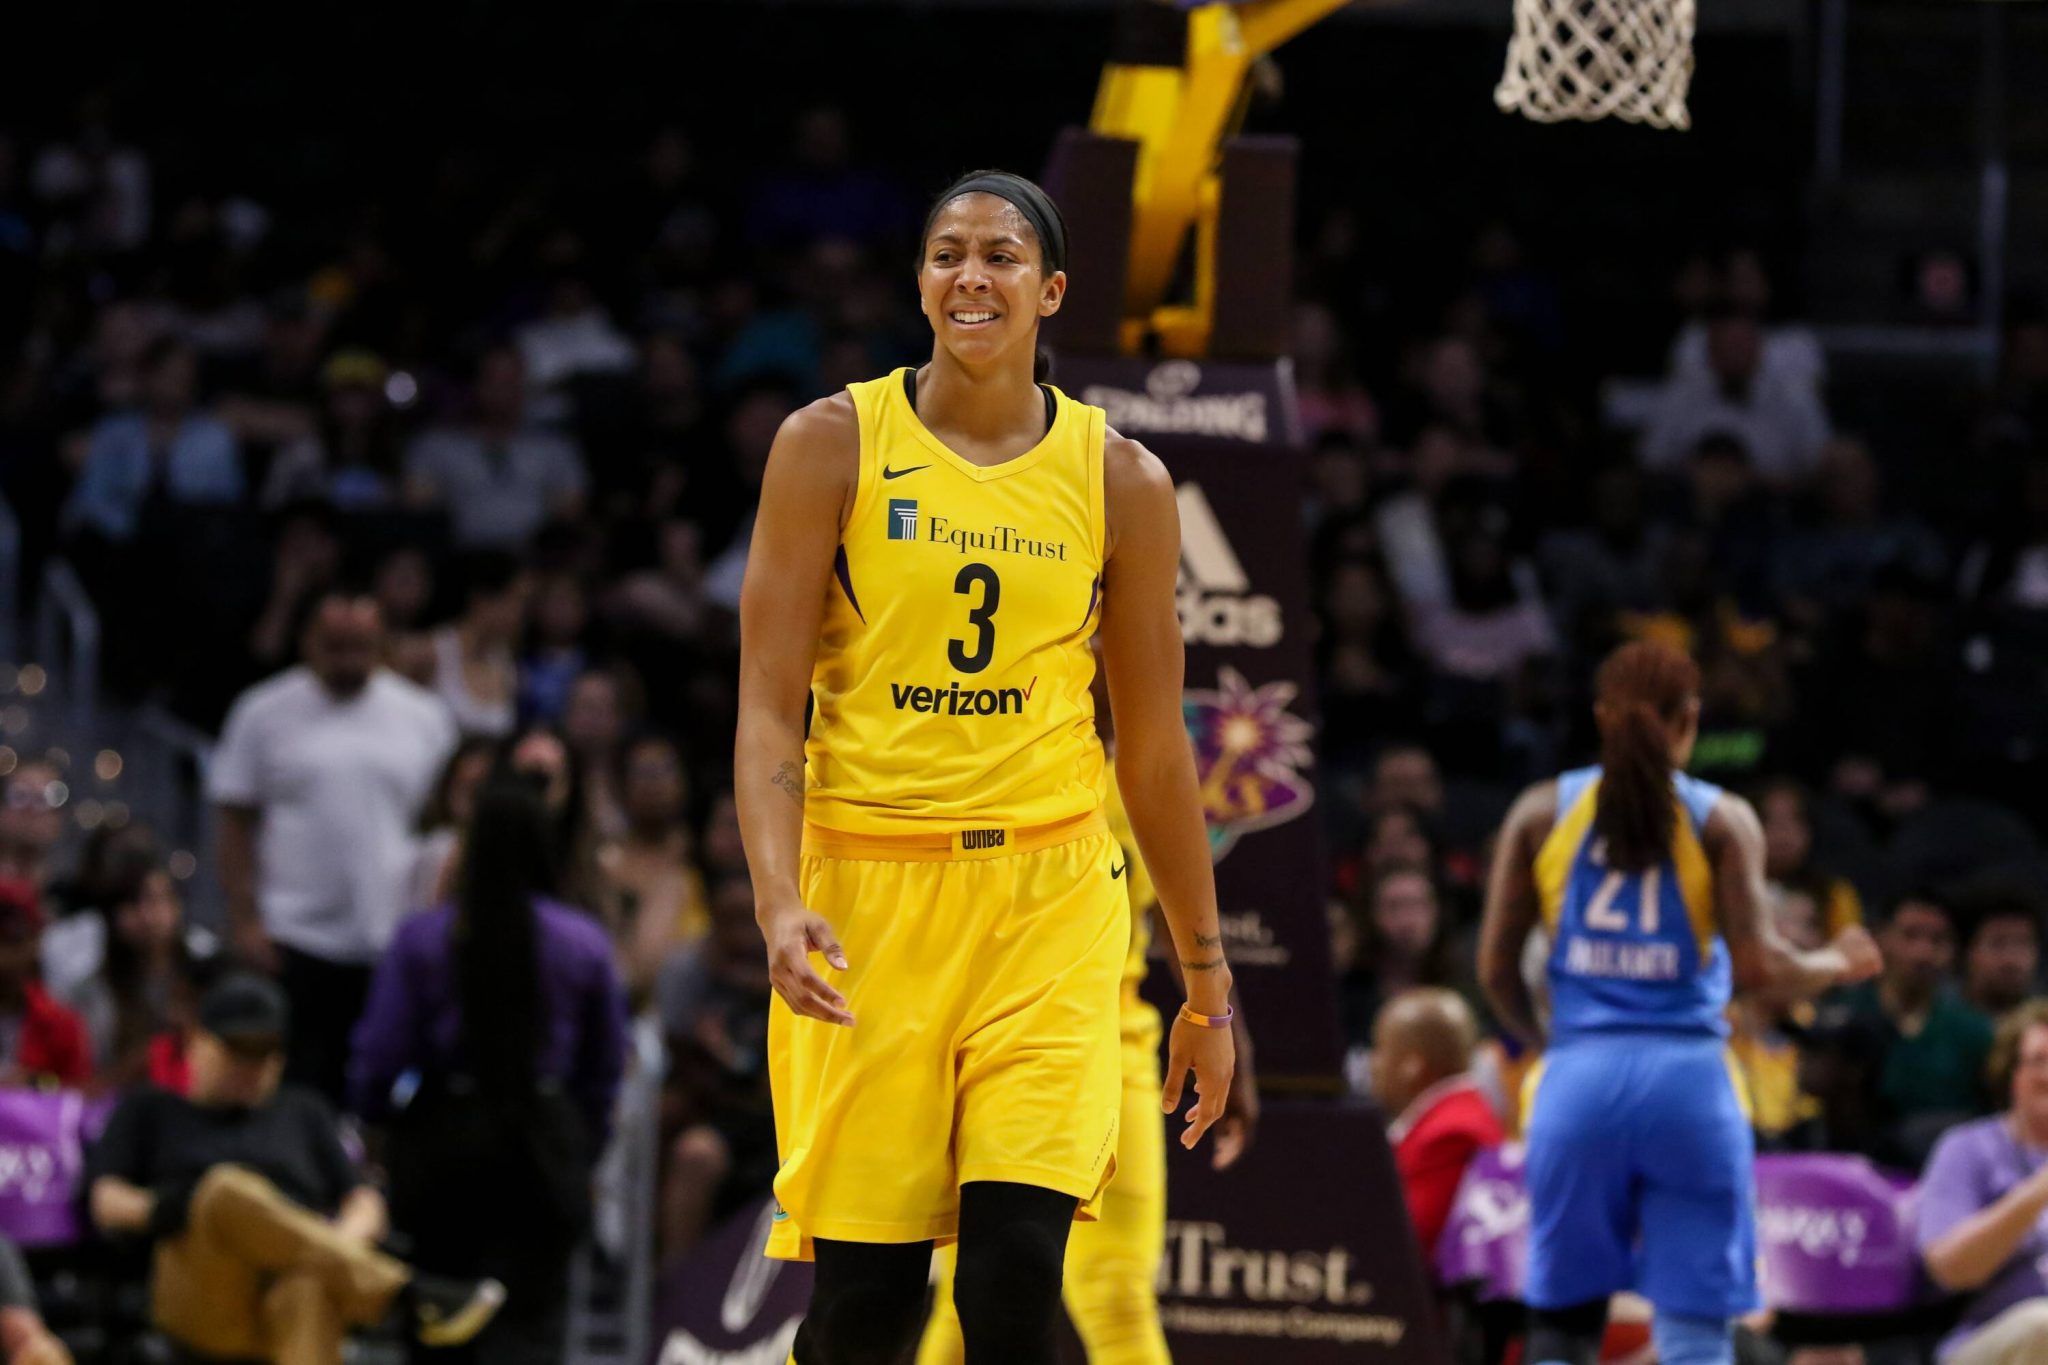 Candace Parker 2023 Net Worth, Salary, Records, and Endorsements